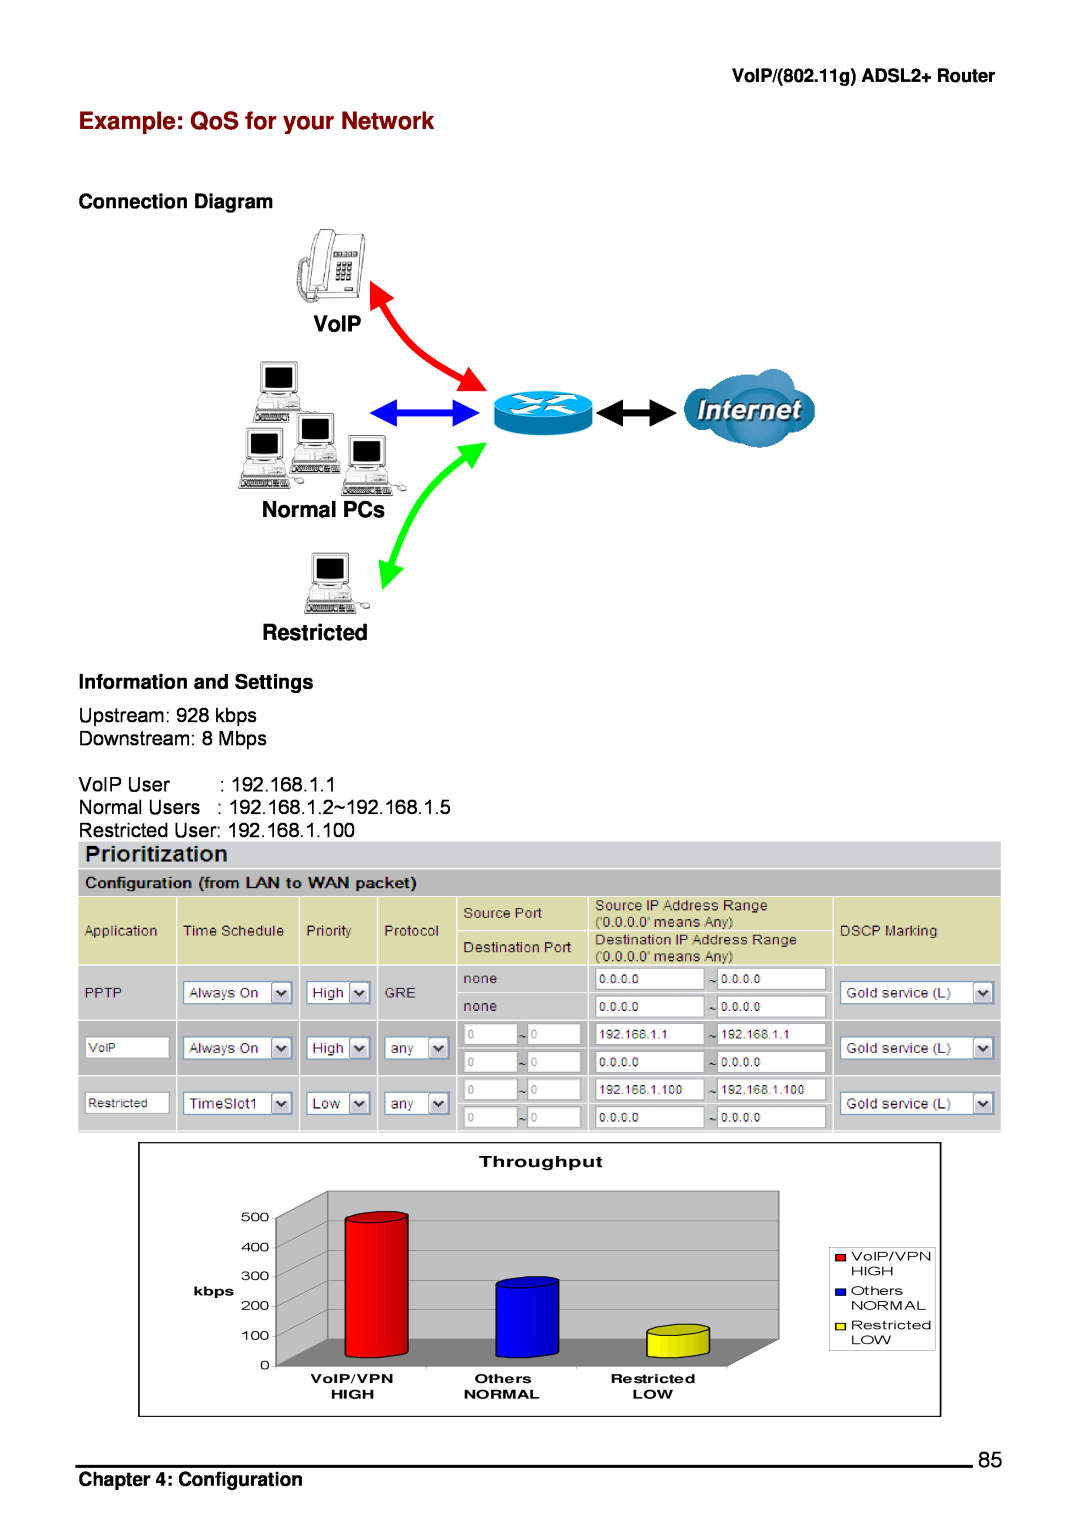 Billion Electric Company 7402VL Example QoS for your Network, VoIP Normal PCs Restricted, Connection Diagram, Throughput 